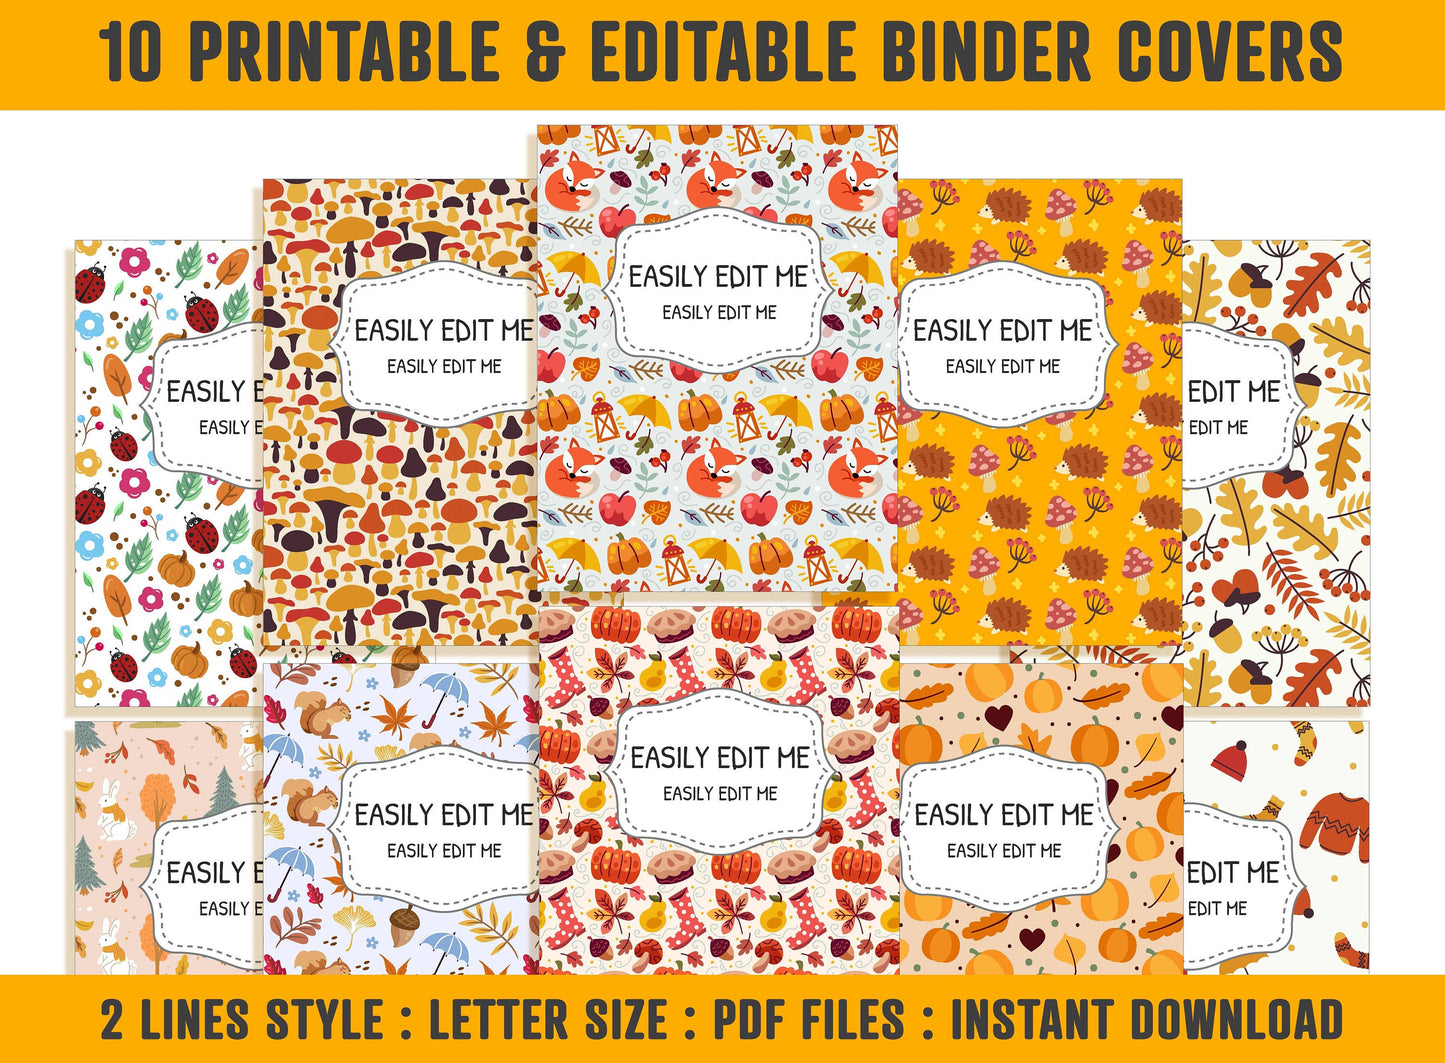 Fall Planner Covers, 10 Editable Binder Covers and Spines, Binder Cover Printable, Teacher/School Binder, Planner Cover Autumn Binder Insert